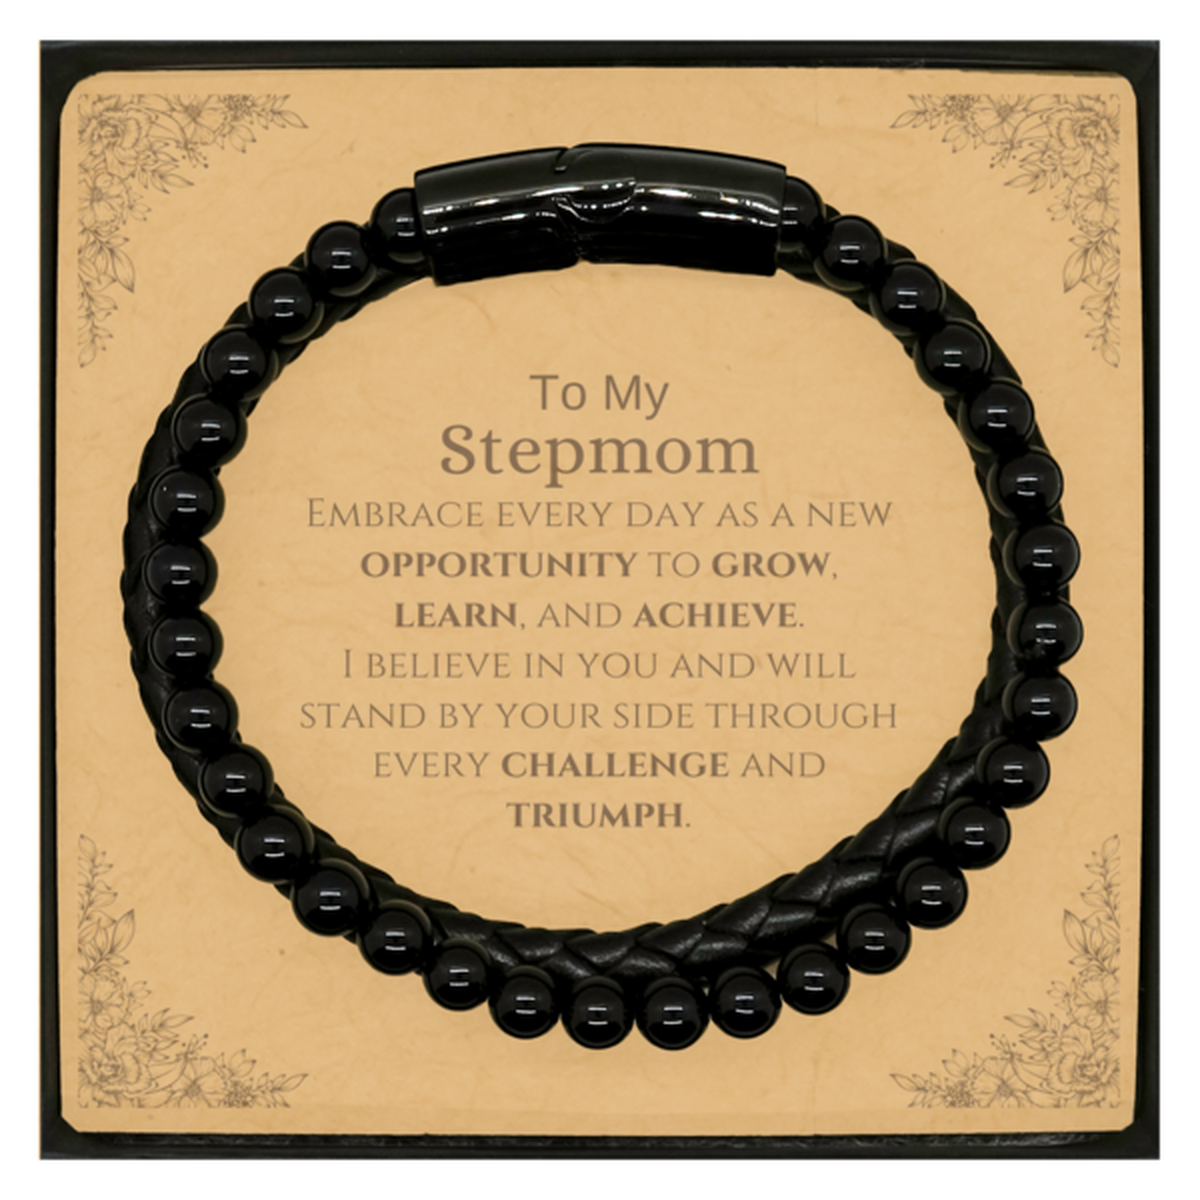 To My Stepmom Gifts, I believe in you and will stand by your side, Inspirational Stone Leather Bracelets For Stepmom, Birthday Christmas Motivational Stepmom Gifts